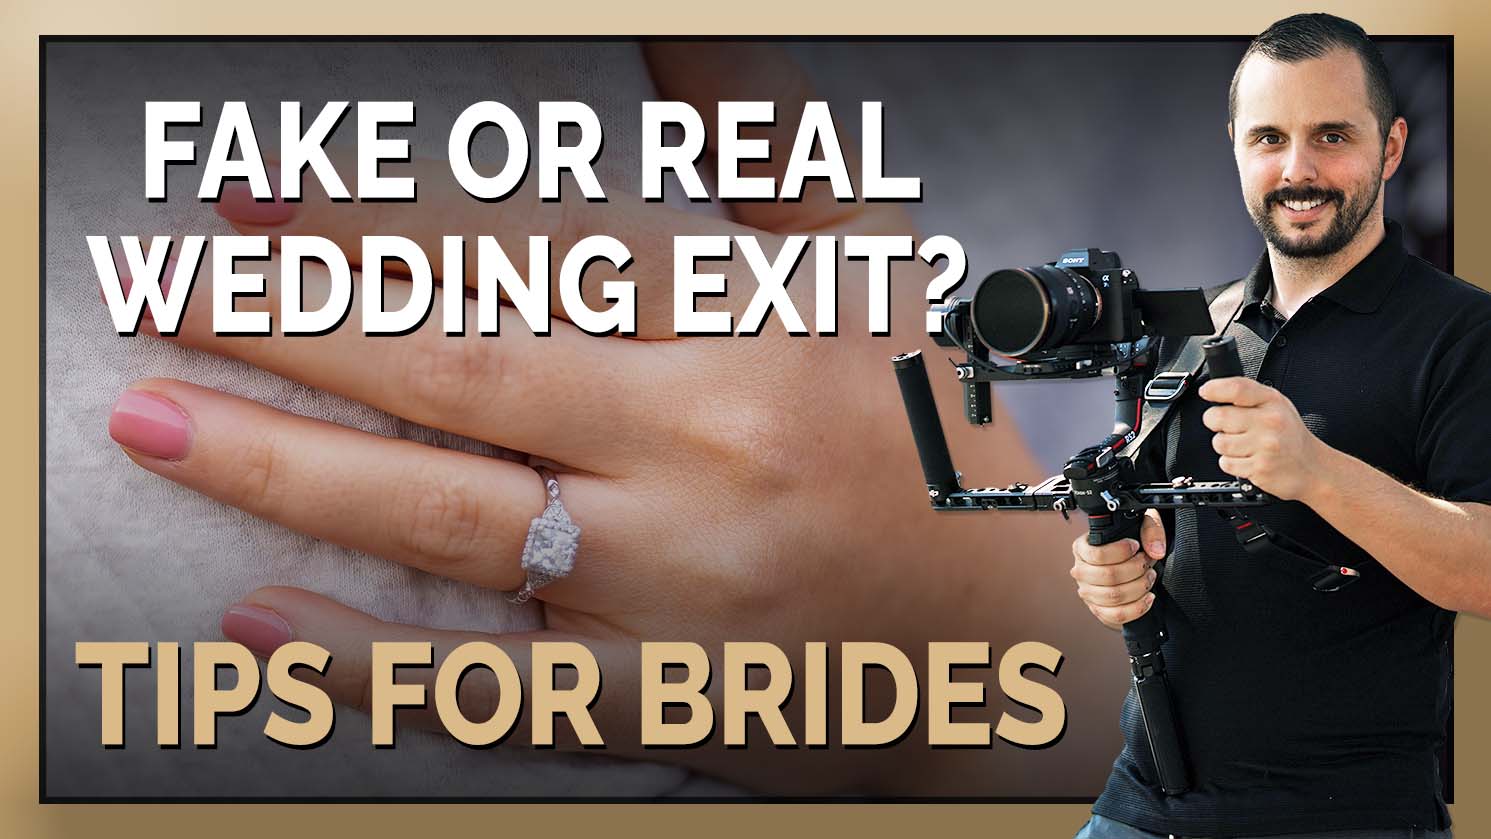 Should I Do A Fake Wedding Exit or a Real Wedding Exit?